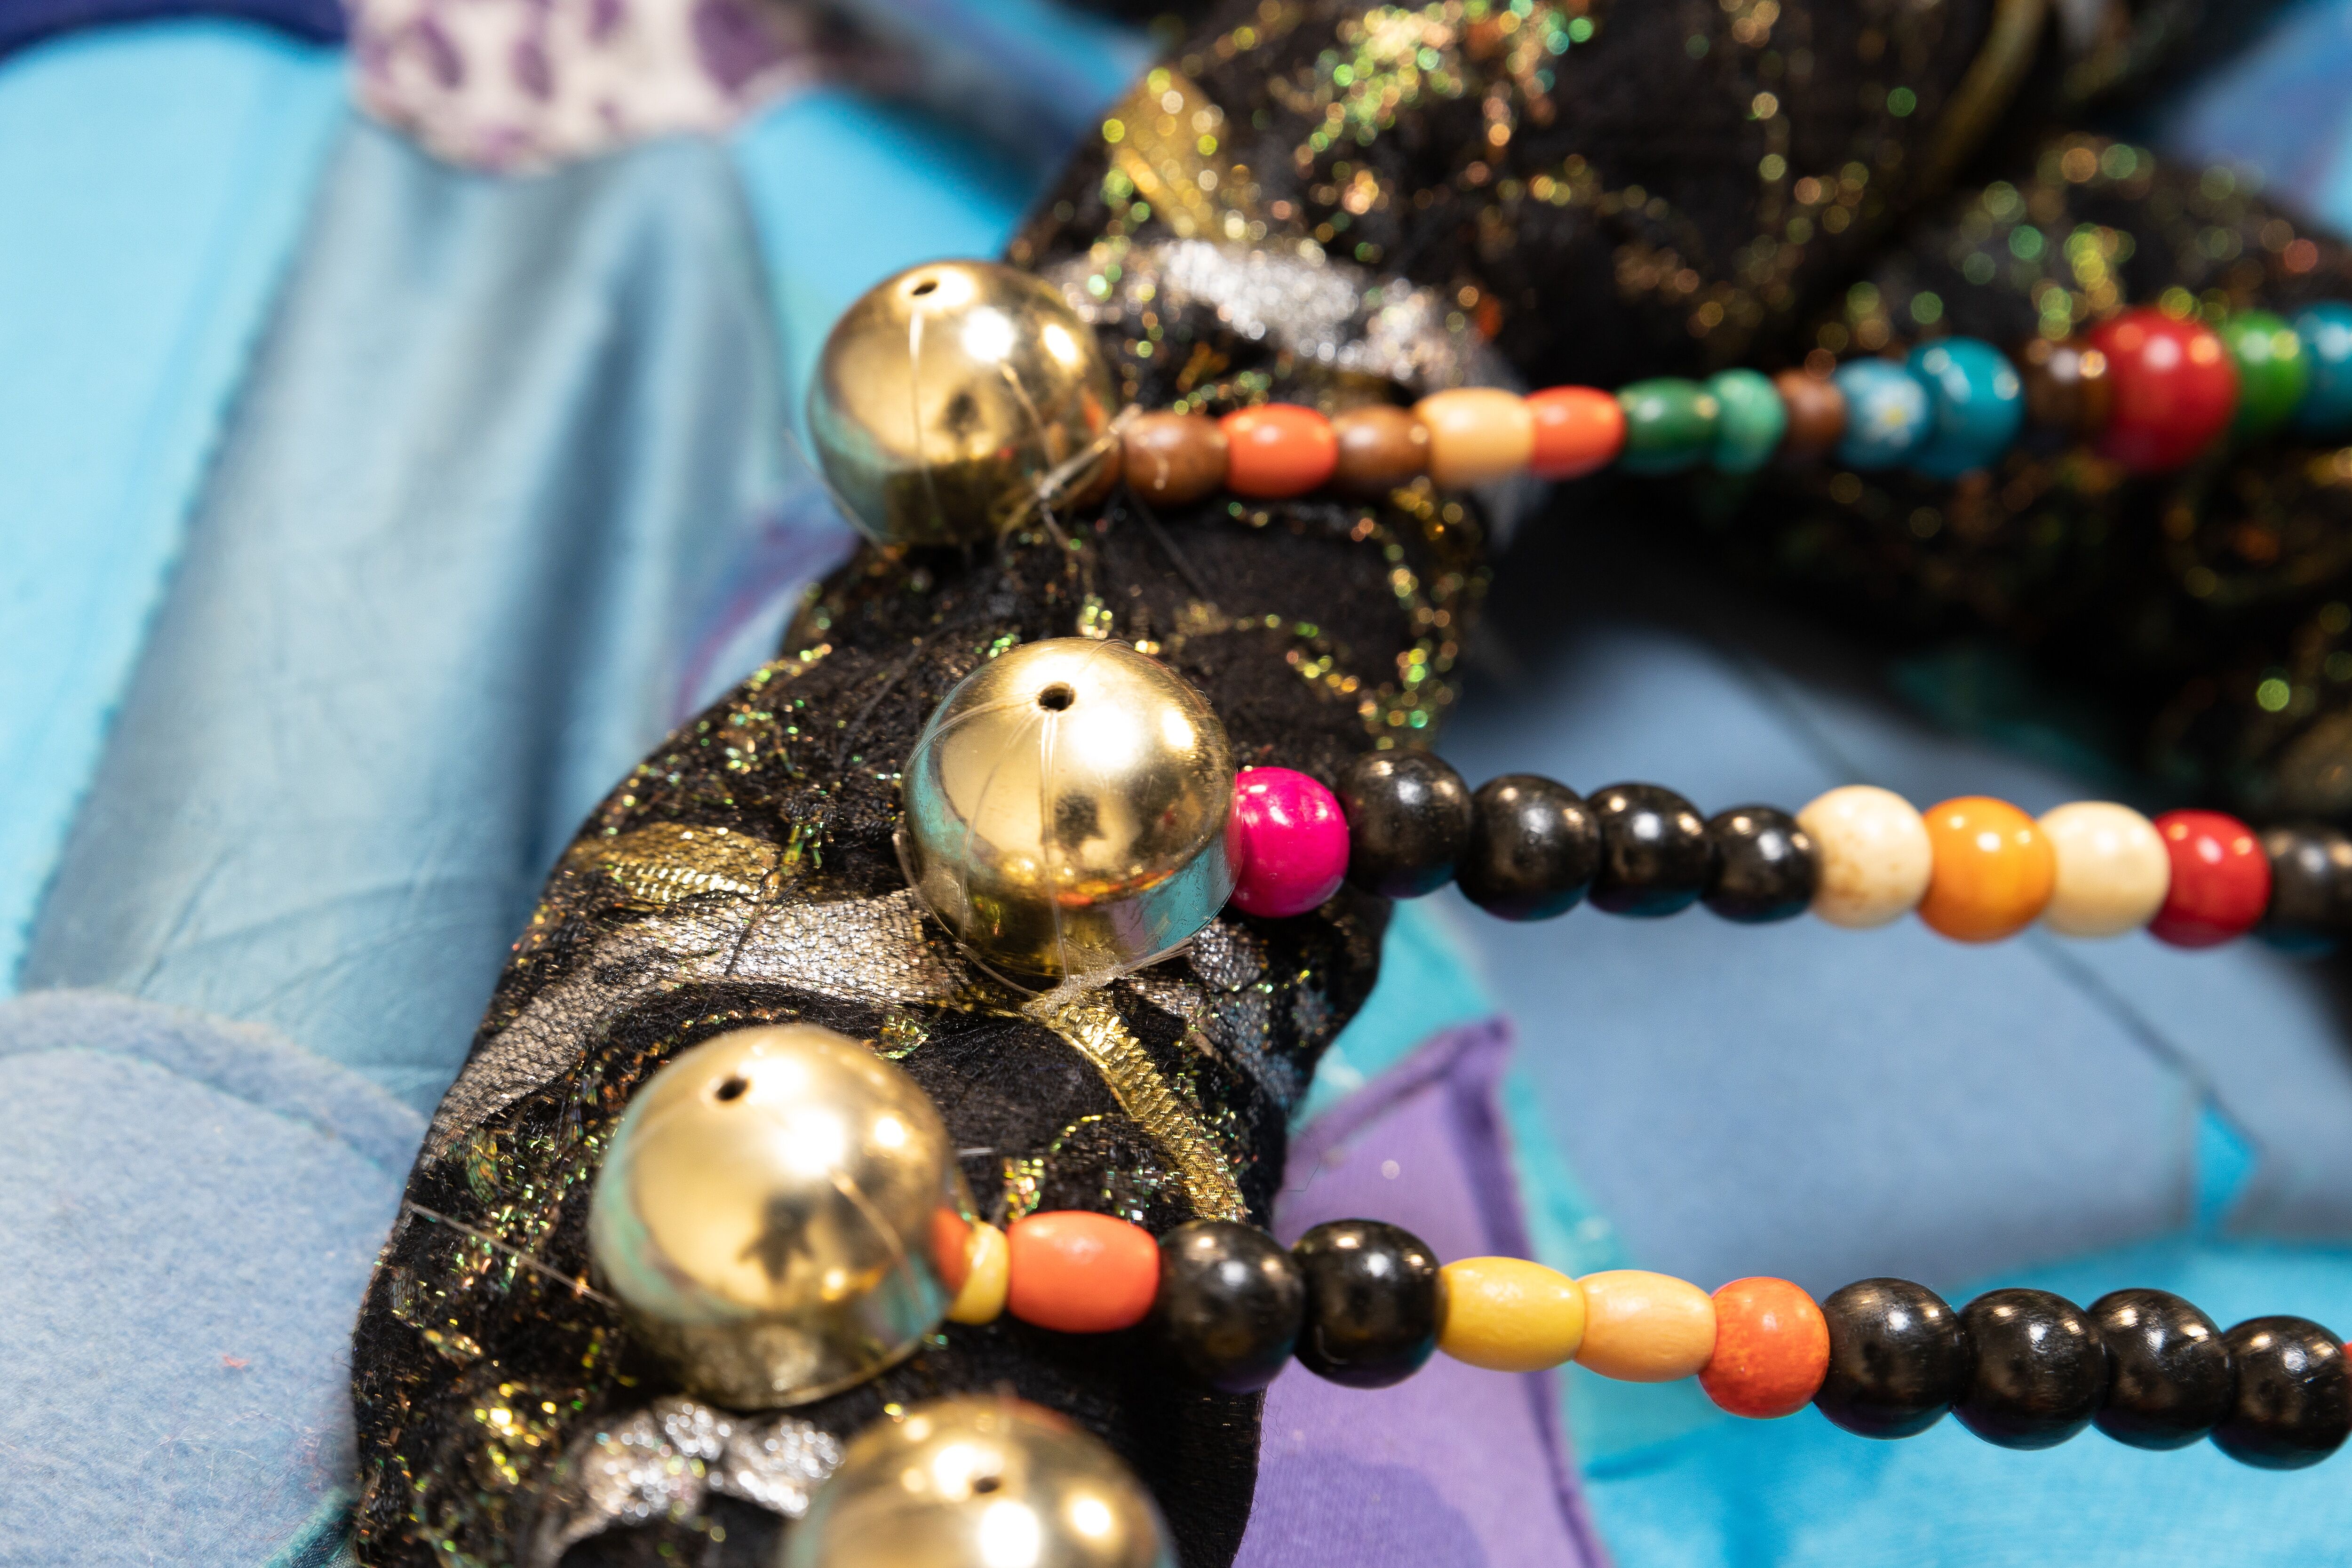 A close-up of multicolored beads and golden baubles arranged on glittery black fabric with hints of blue and purple textiles.